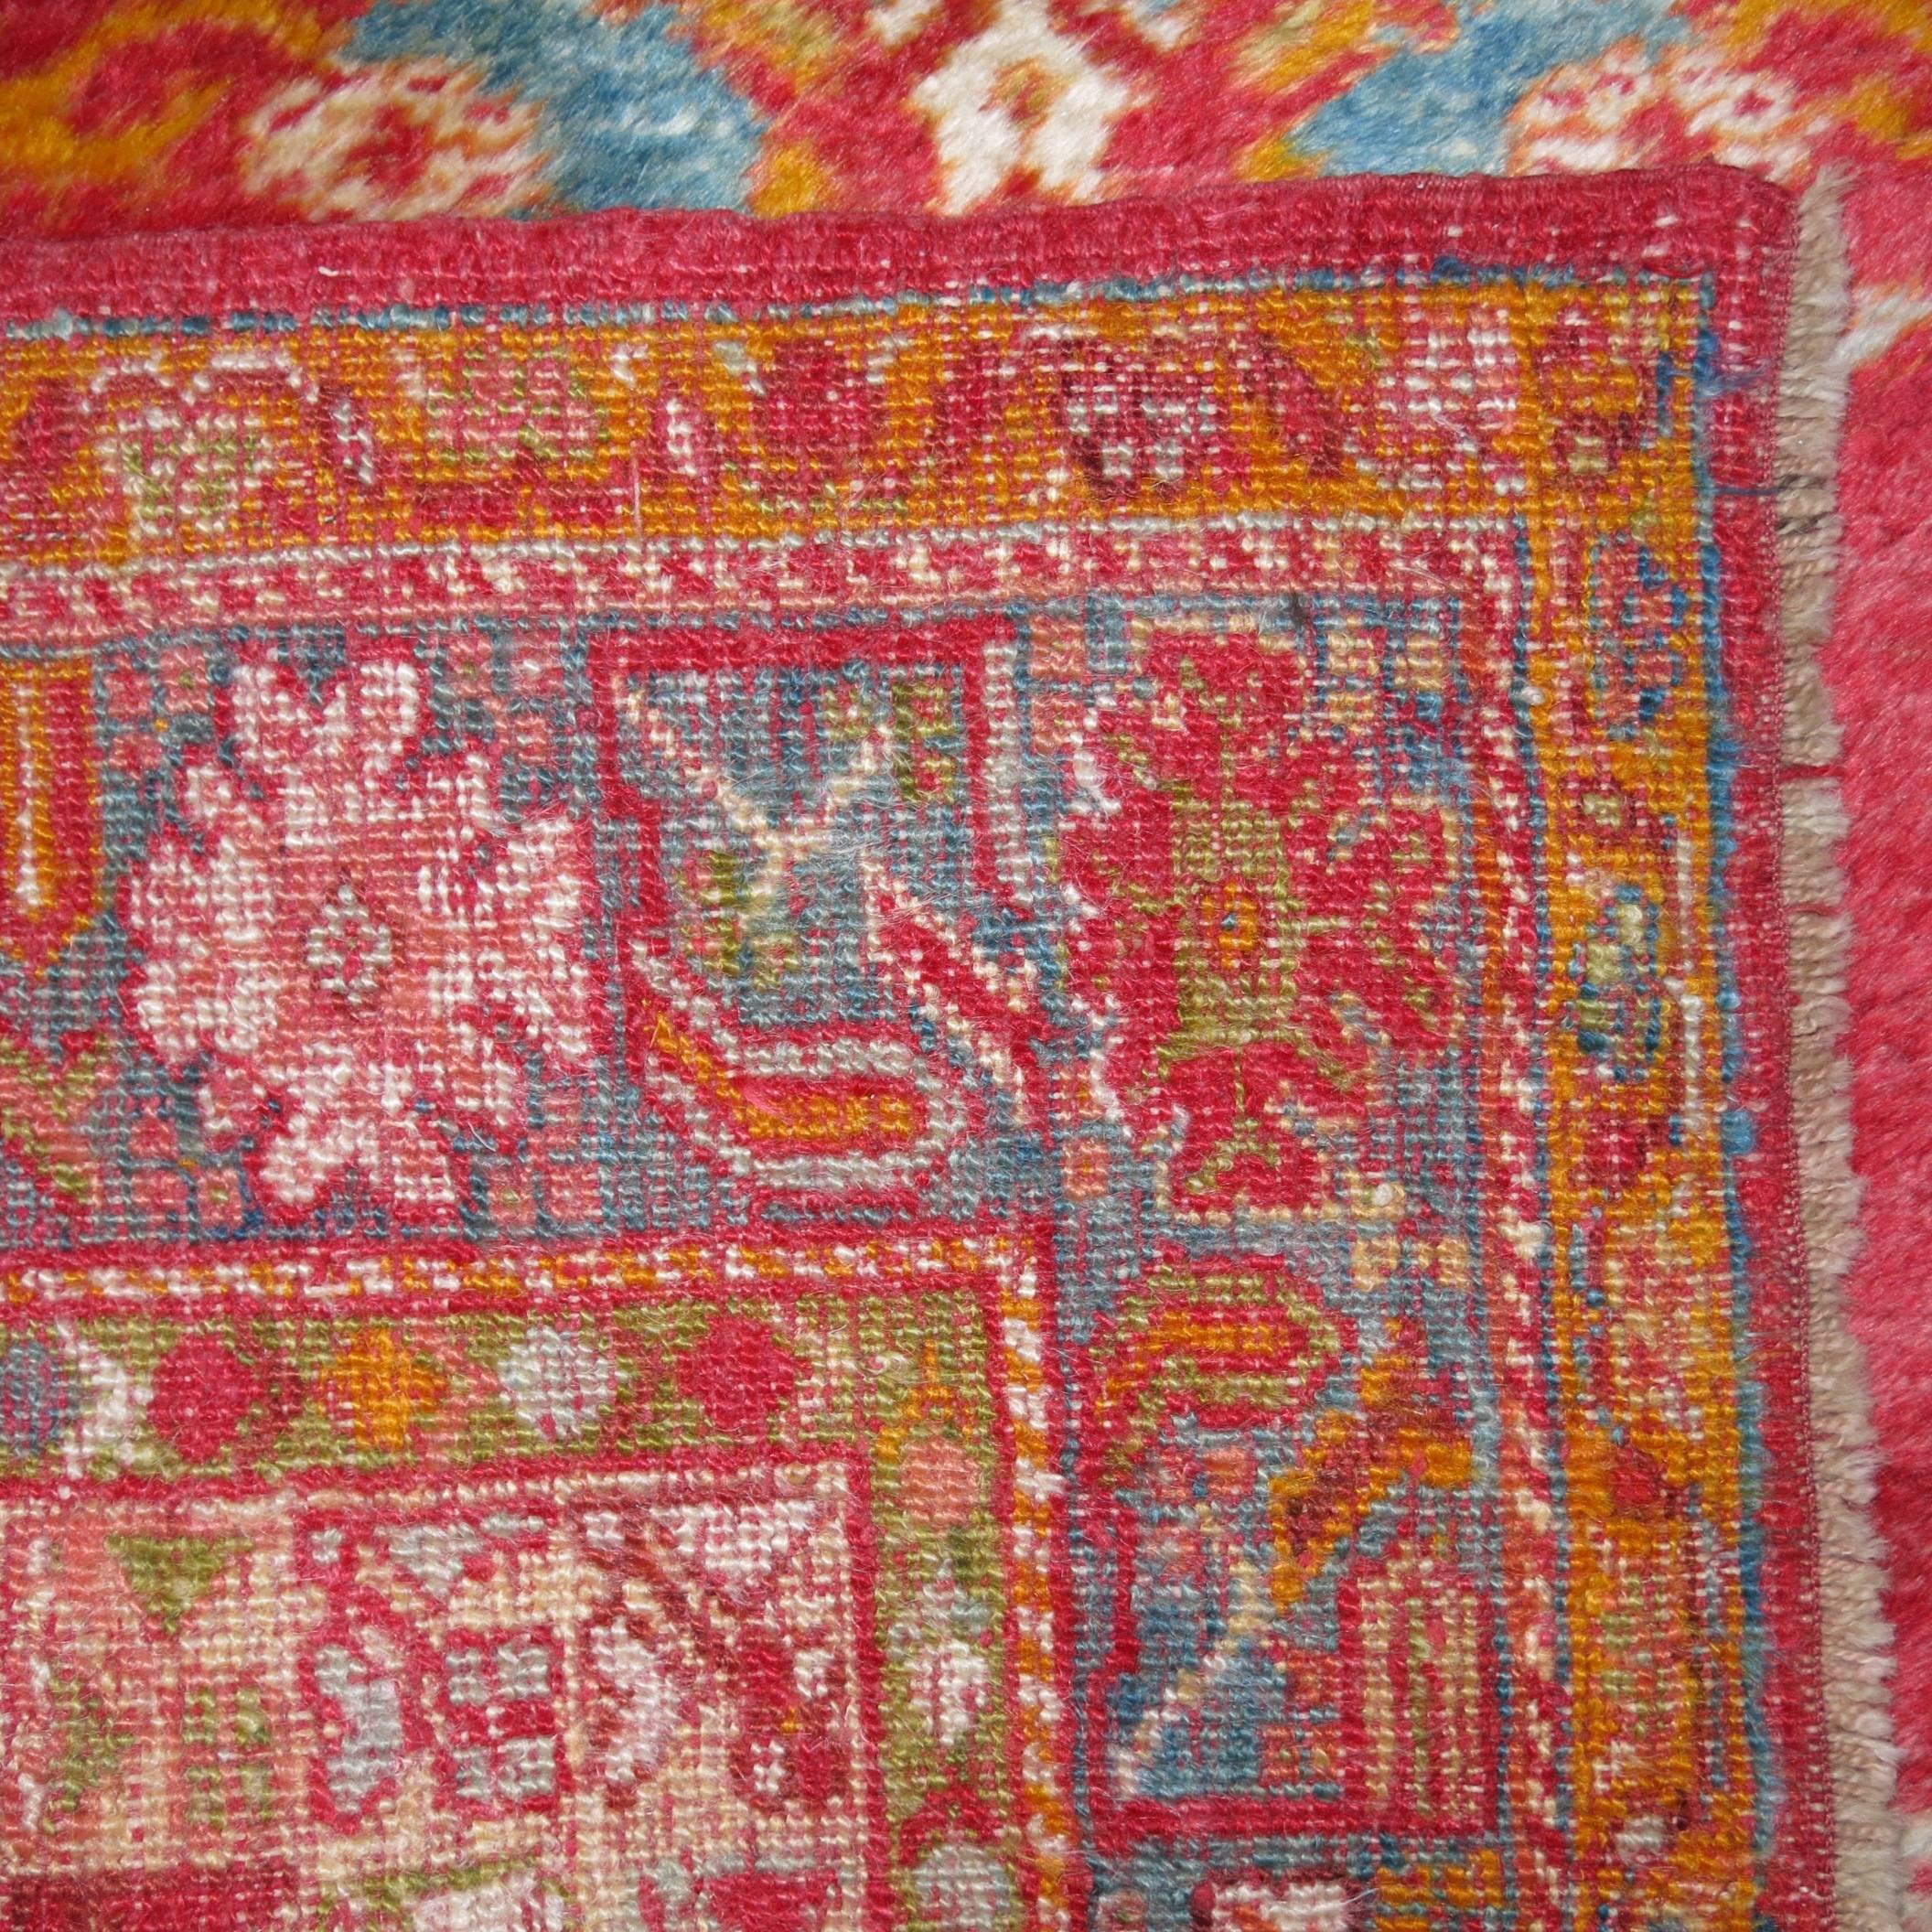 An antique angora wool authentic Oushak rug featuring bright colors from the early 20th century. The field is red, accents in turquoise and orange

Measures: 3'6